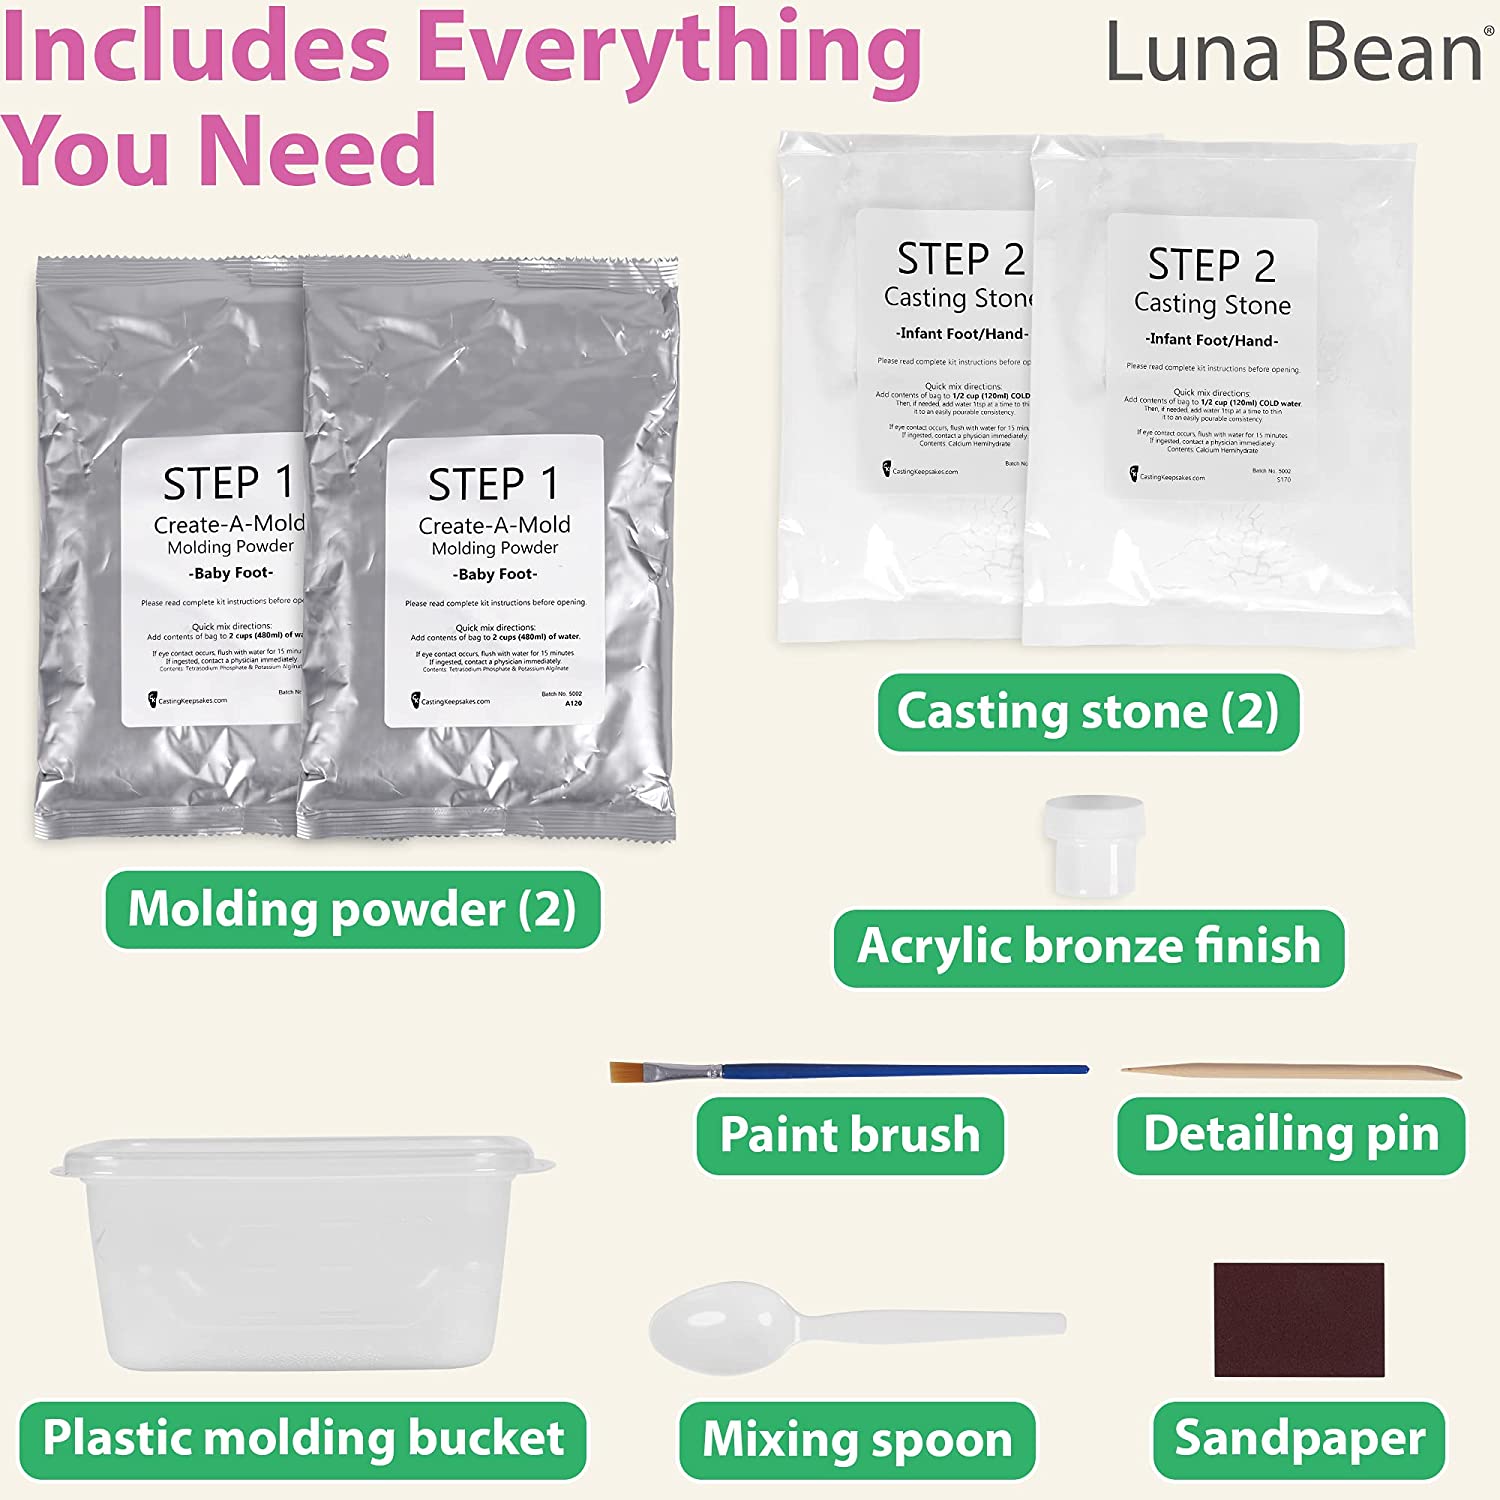 Luna bean casting kit unboxing and explaining the process more in